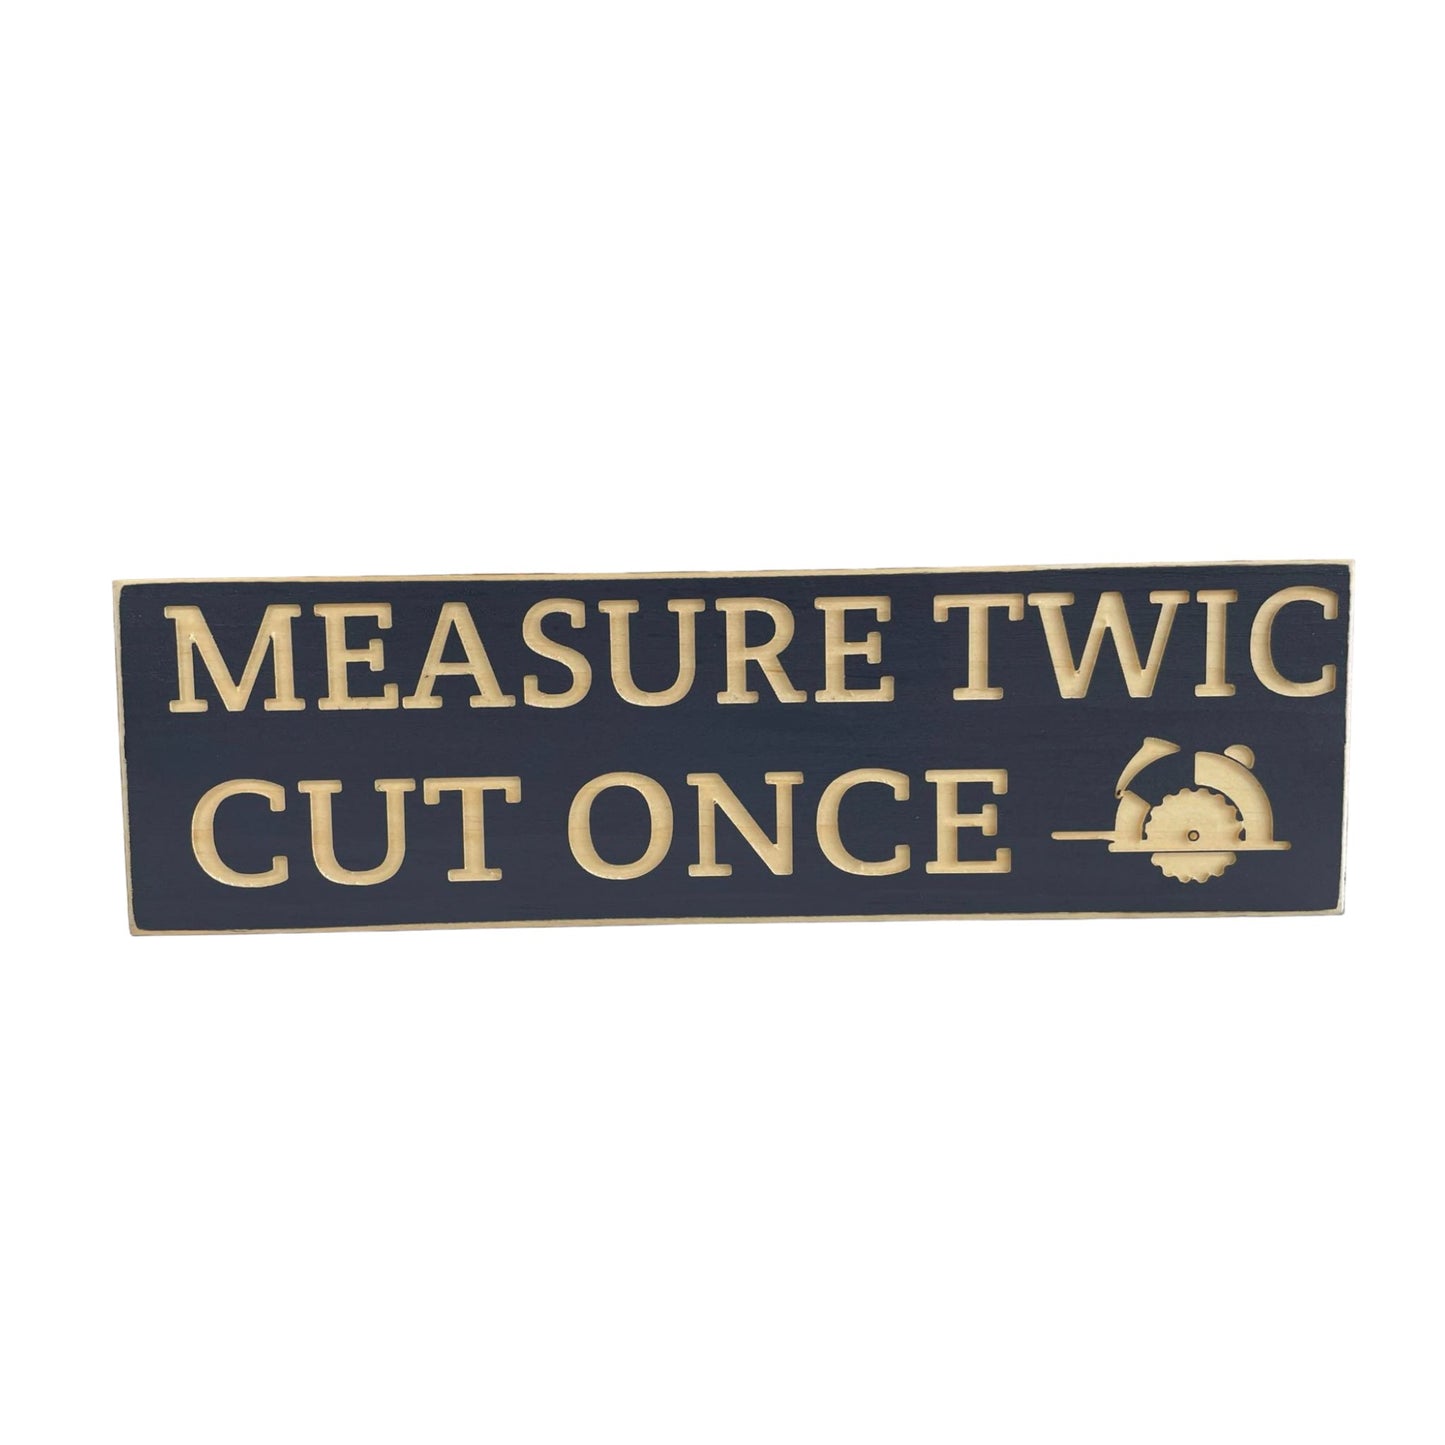 Carved wood sign reading 'Measure Twic and Cut Once' - perfect funny gift for him